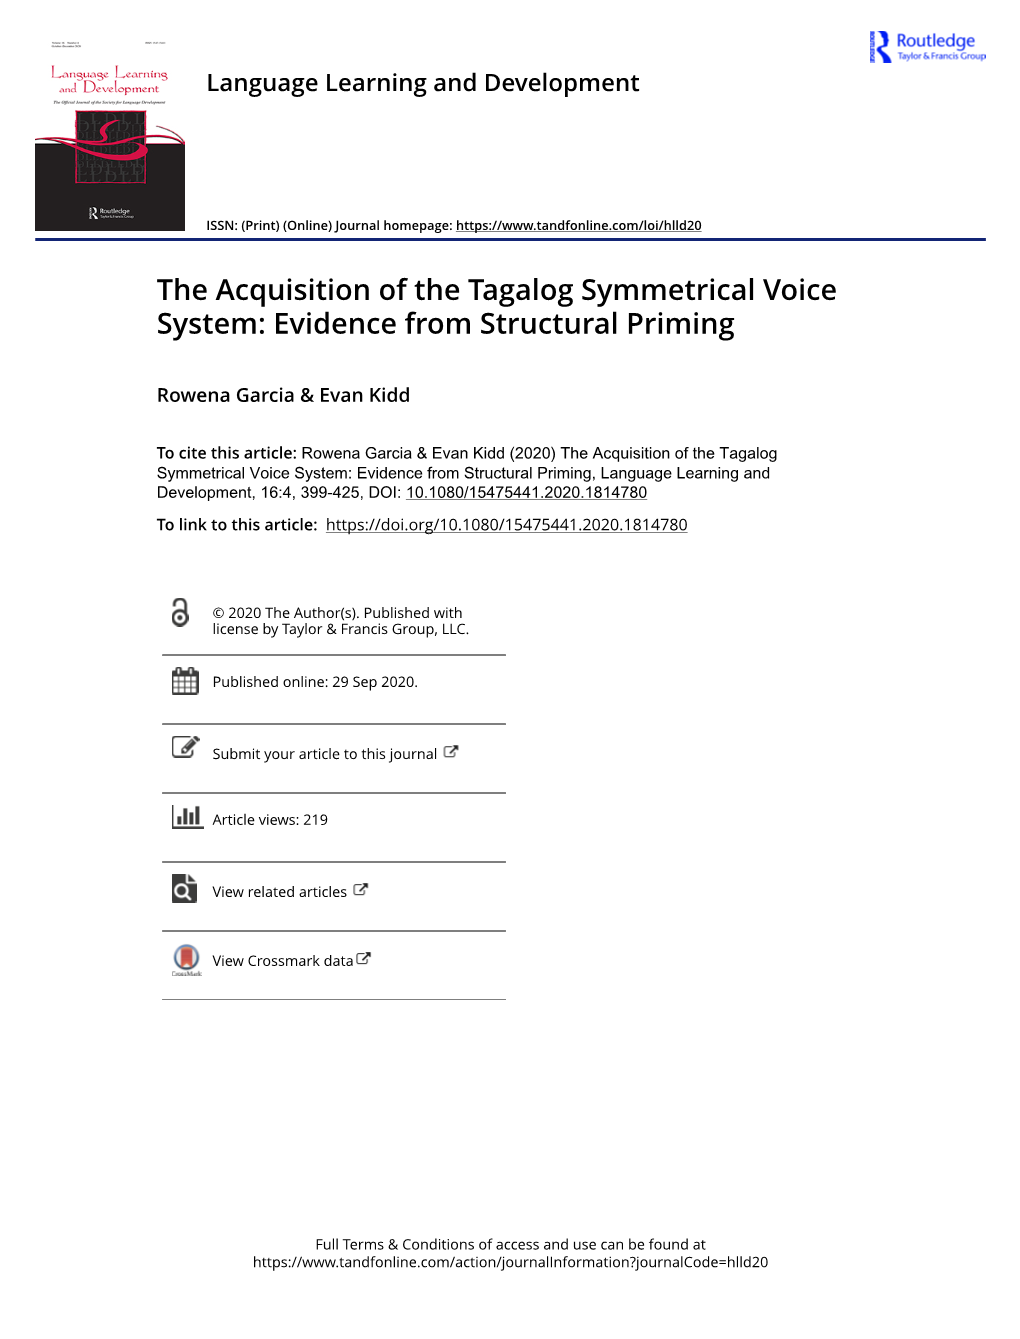 The Acquisition of the Tagalog Symmetrical Voice System: Evidence from Structural Priming